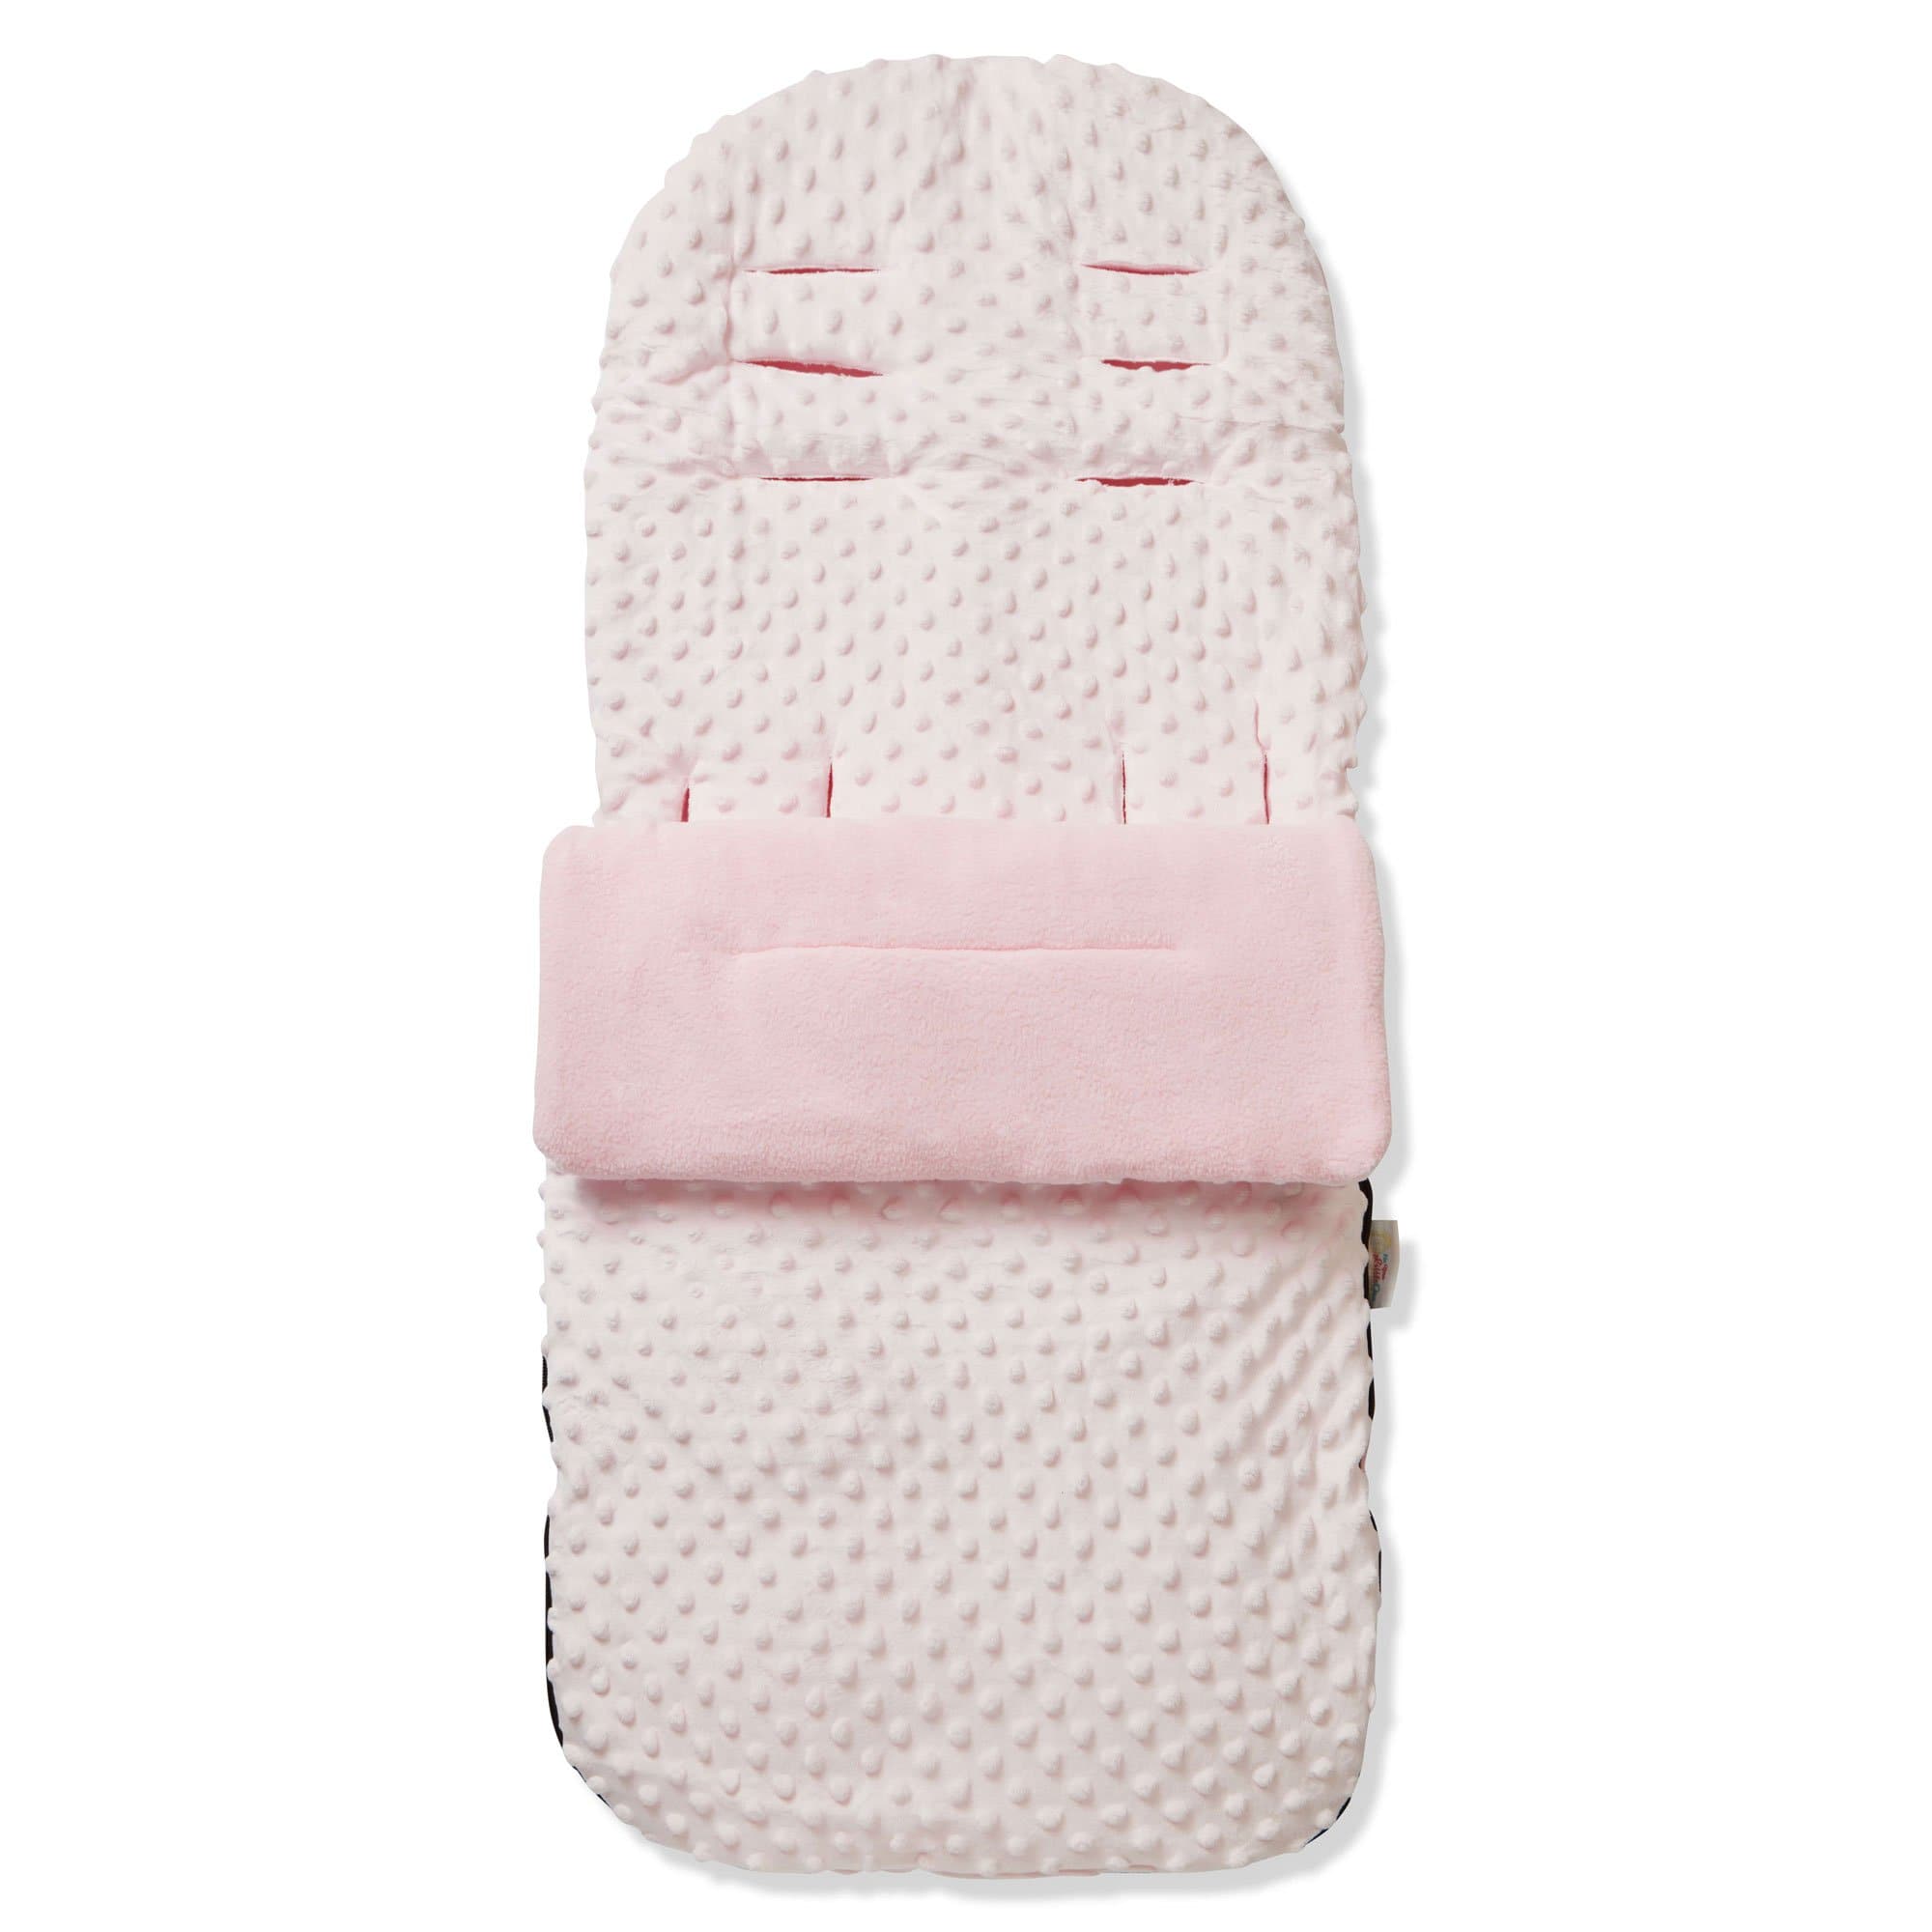 Dimple Footmuff / Cosy Toes Compatible with Kiddicouture - Pink / Fits All Models | For Your Little One